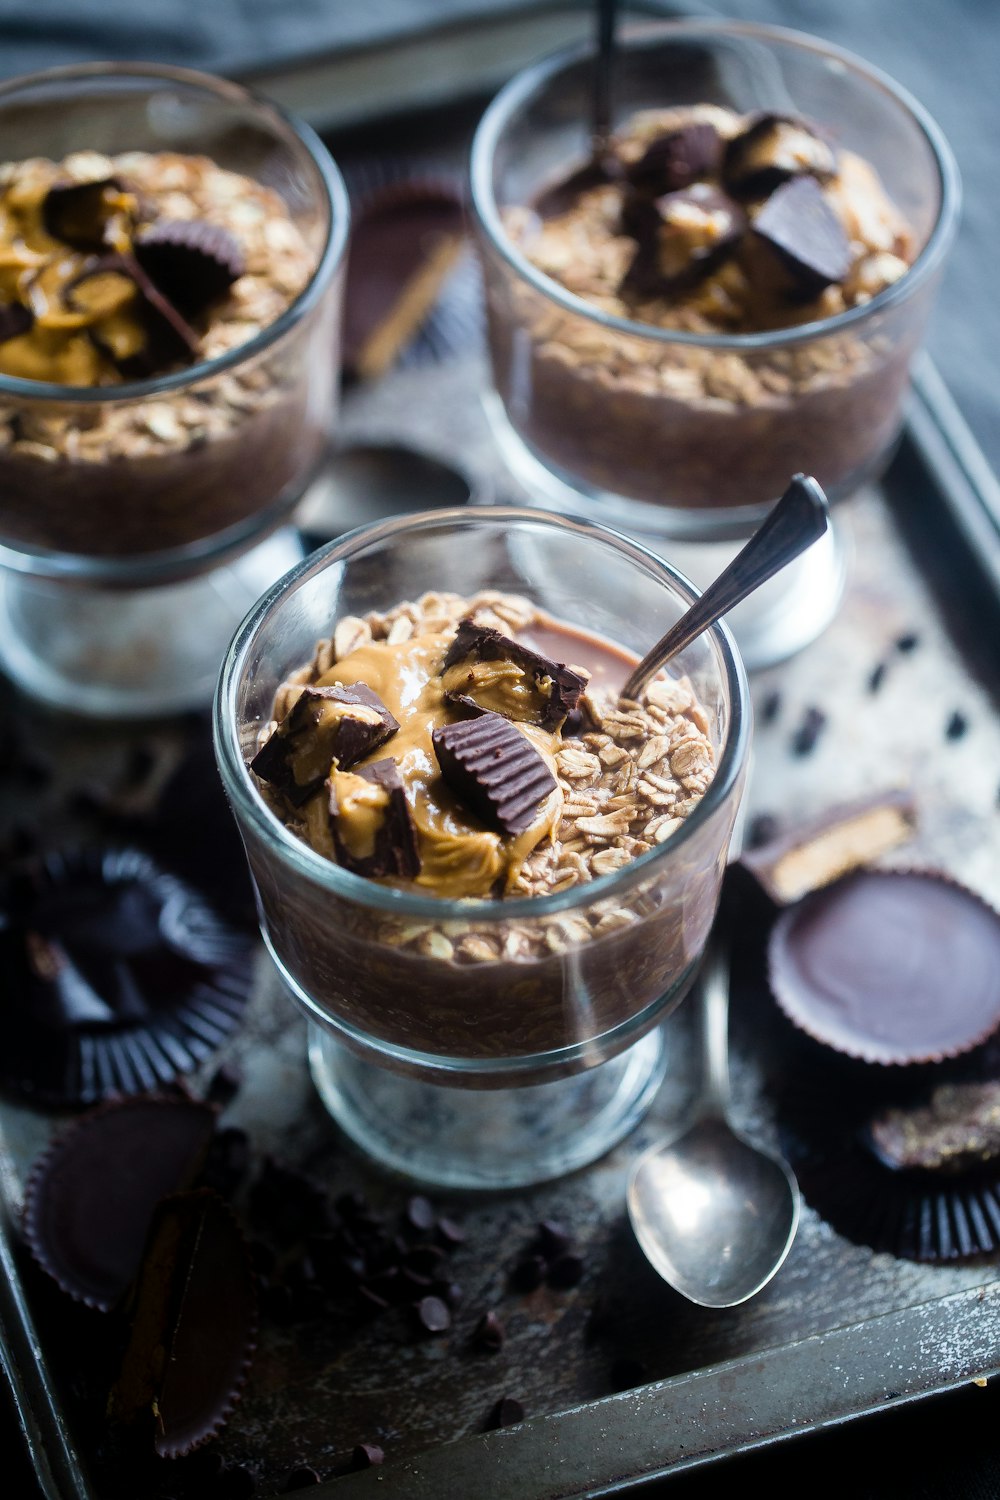 three clear low-stem glasses with chocolate desert foods